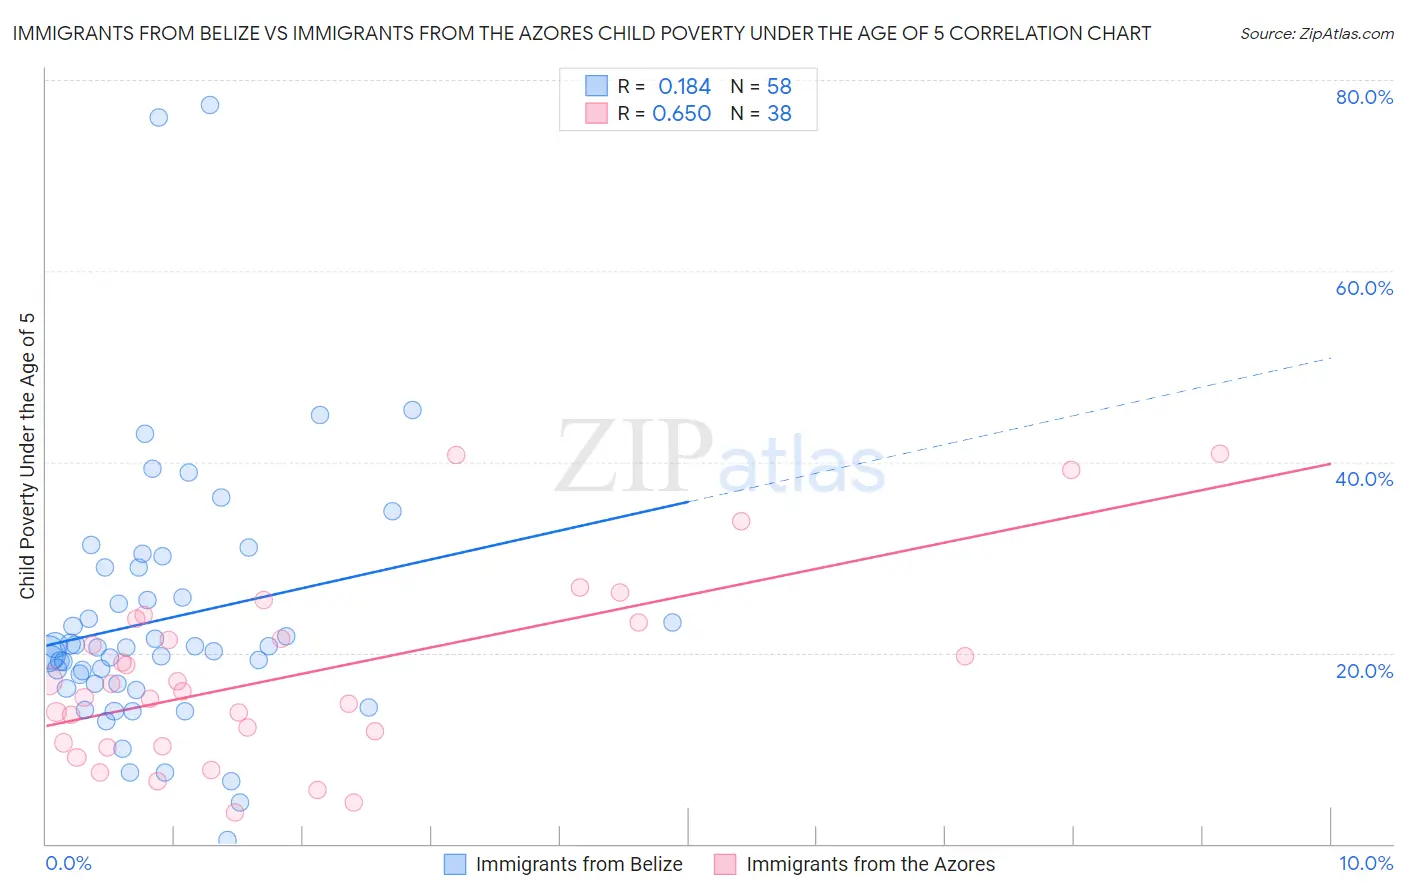 Immigrants from Belize vs Immigrants from the Azores Child Poverty Under the Age of 5